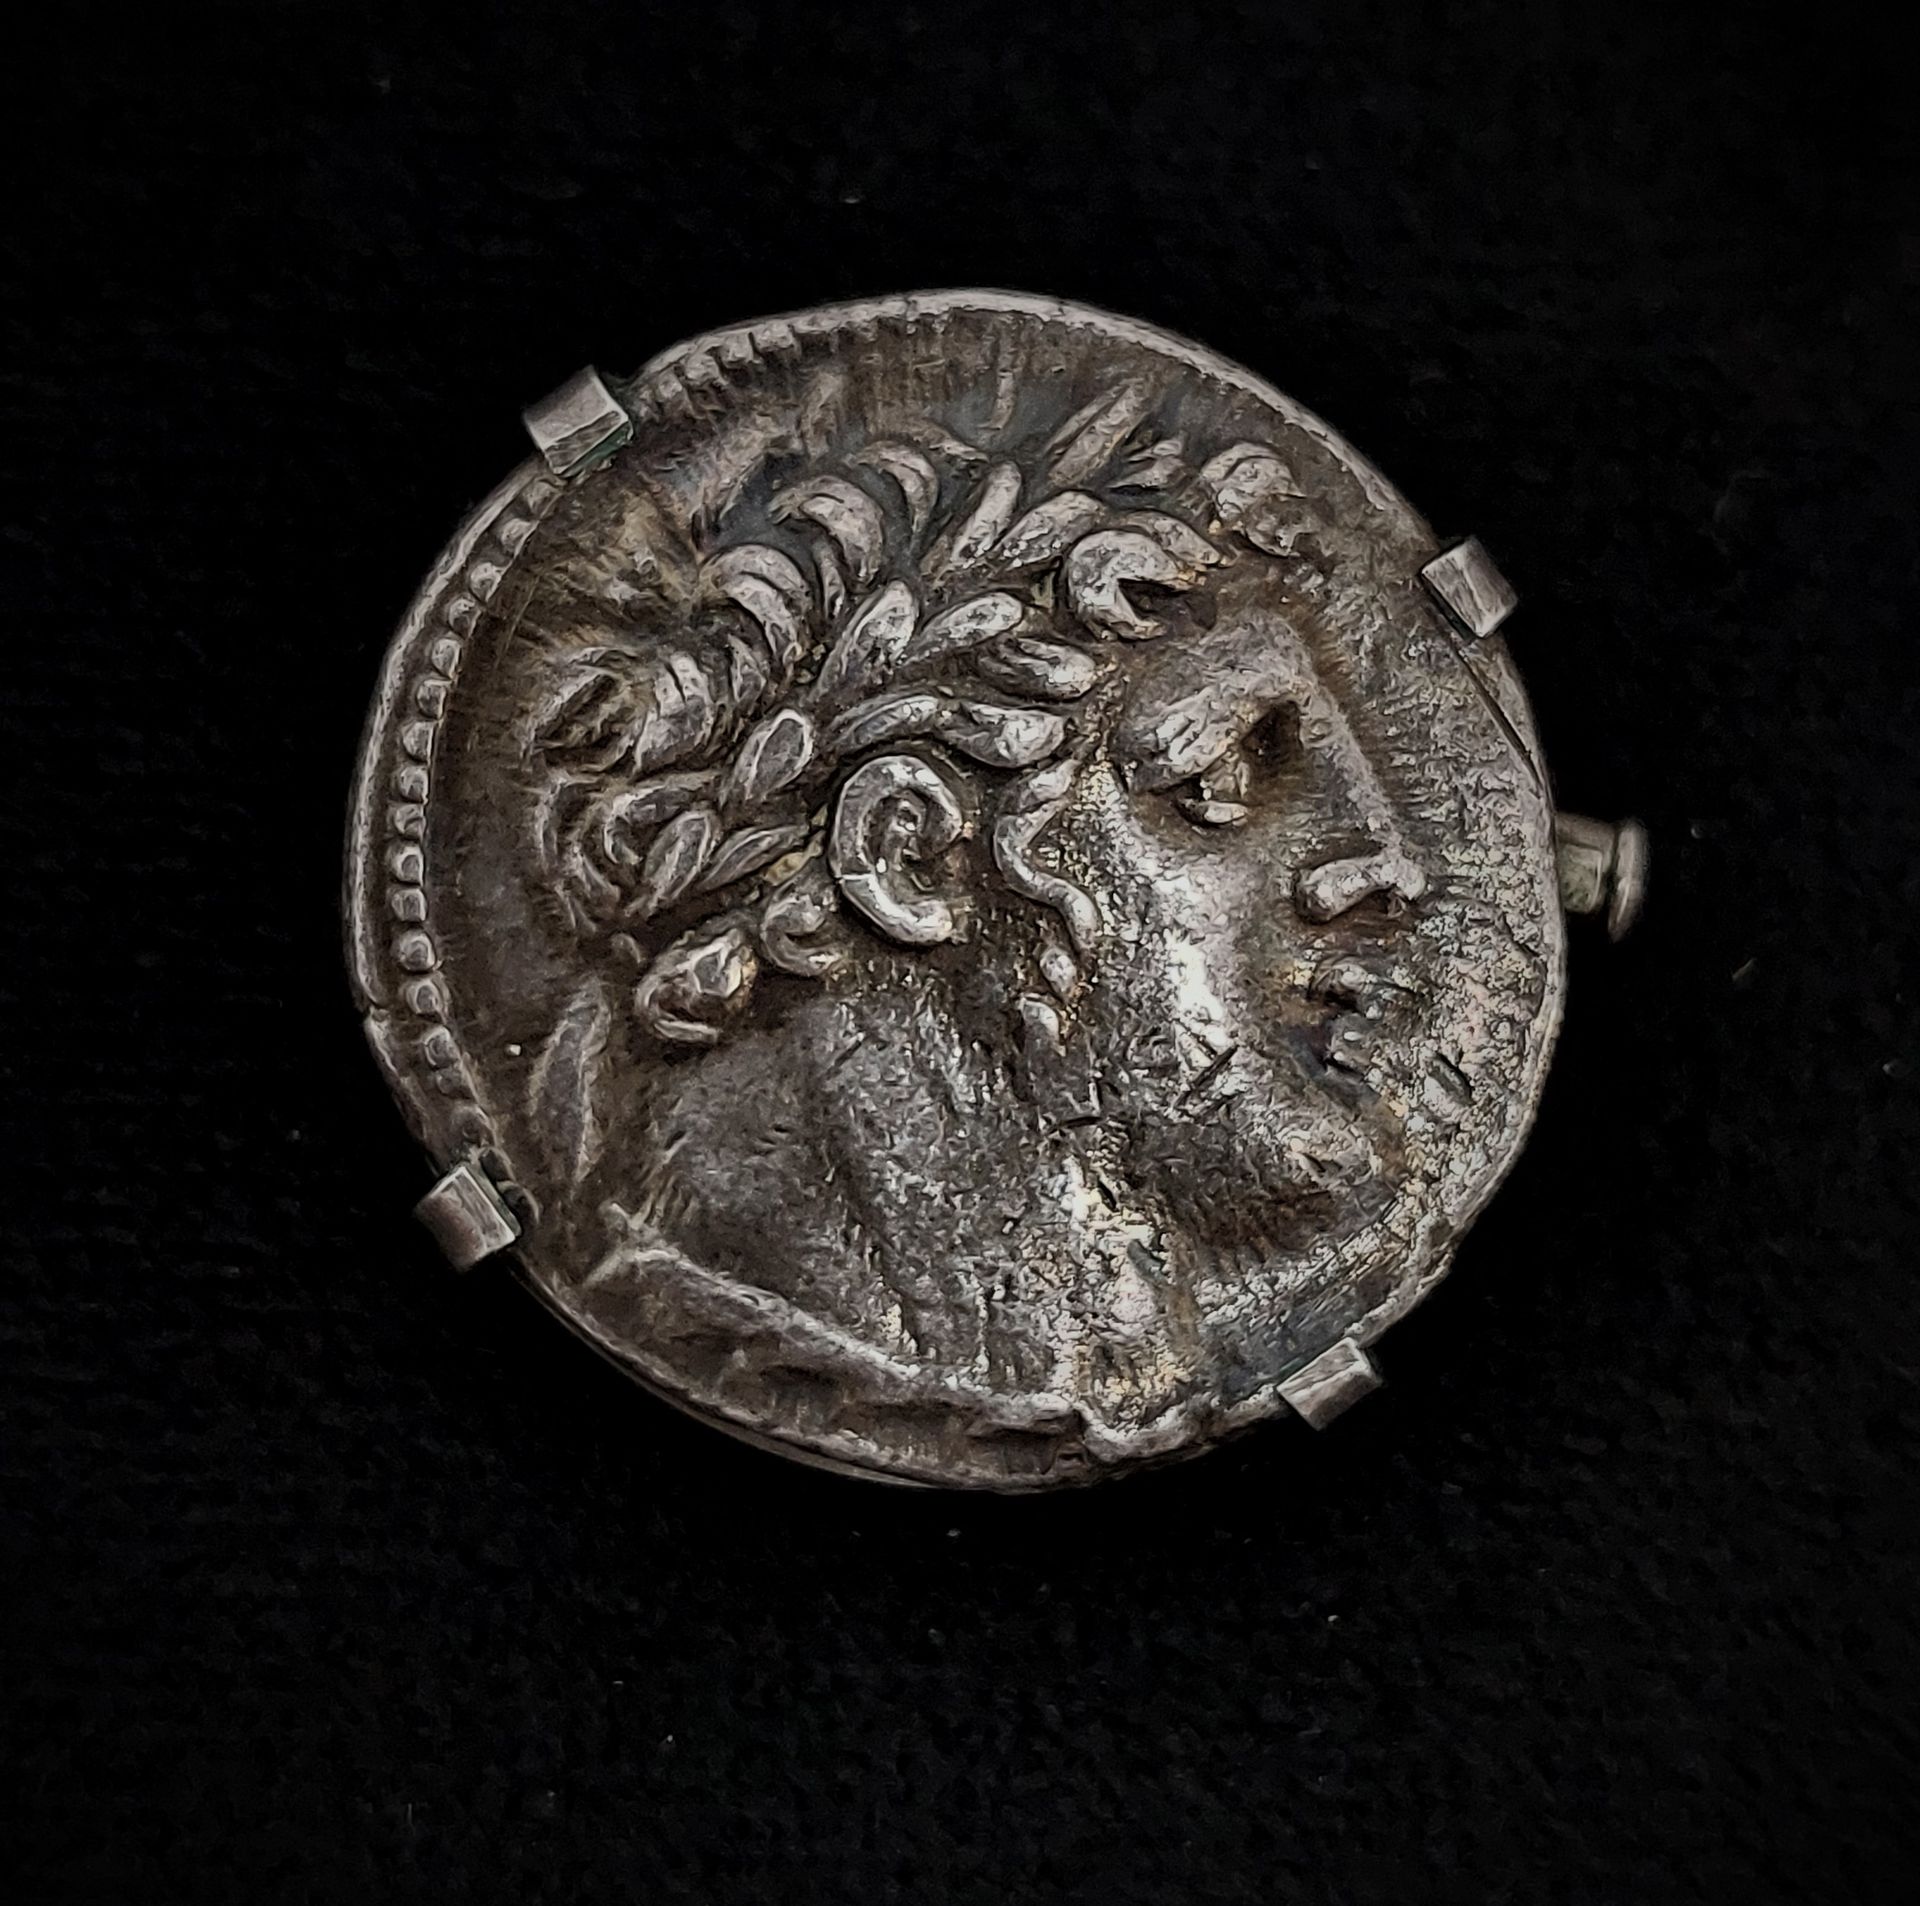 Null 
Silver tetradrachm, Ptolemy ?? R) Eagle to examine, mounted in a brooch

w&hellip;